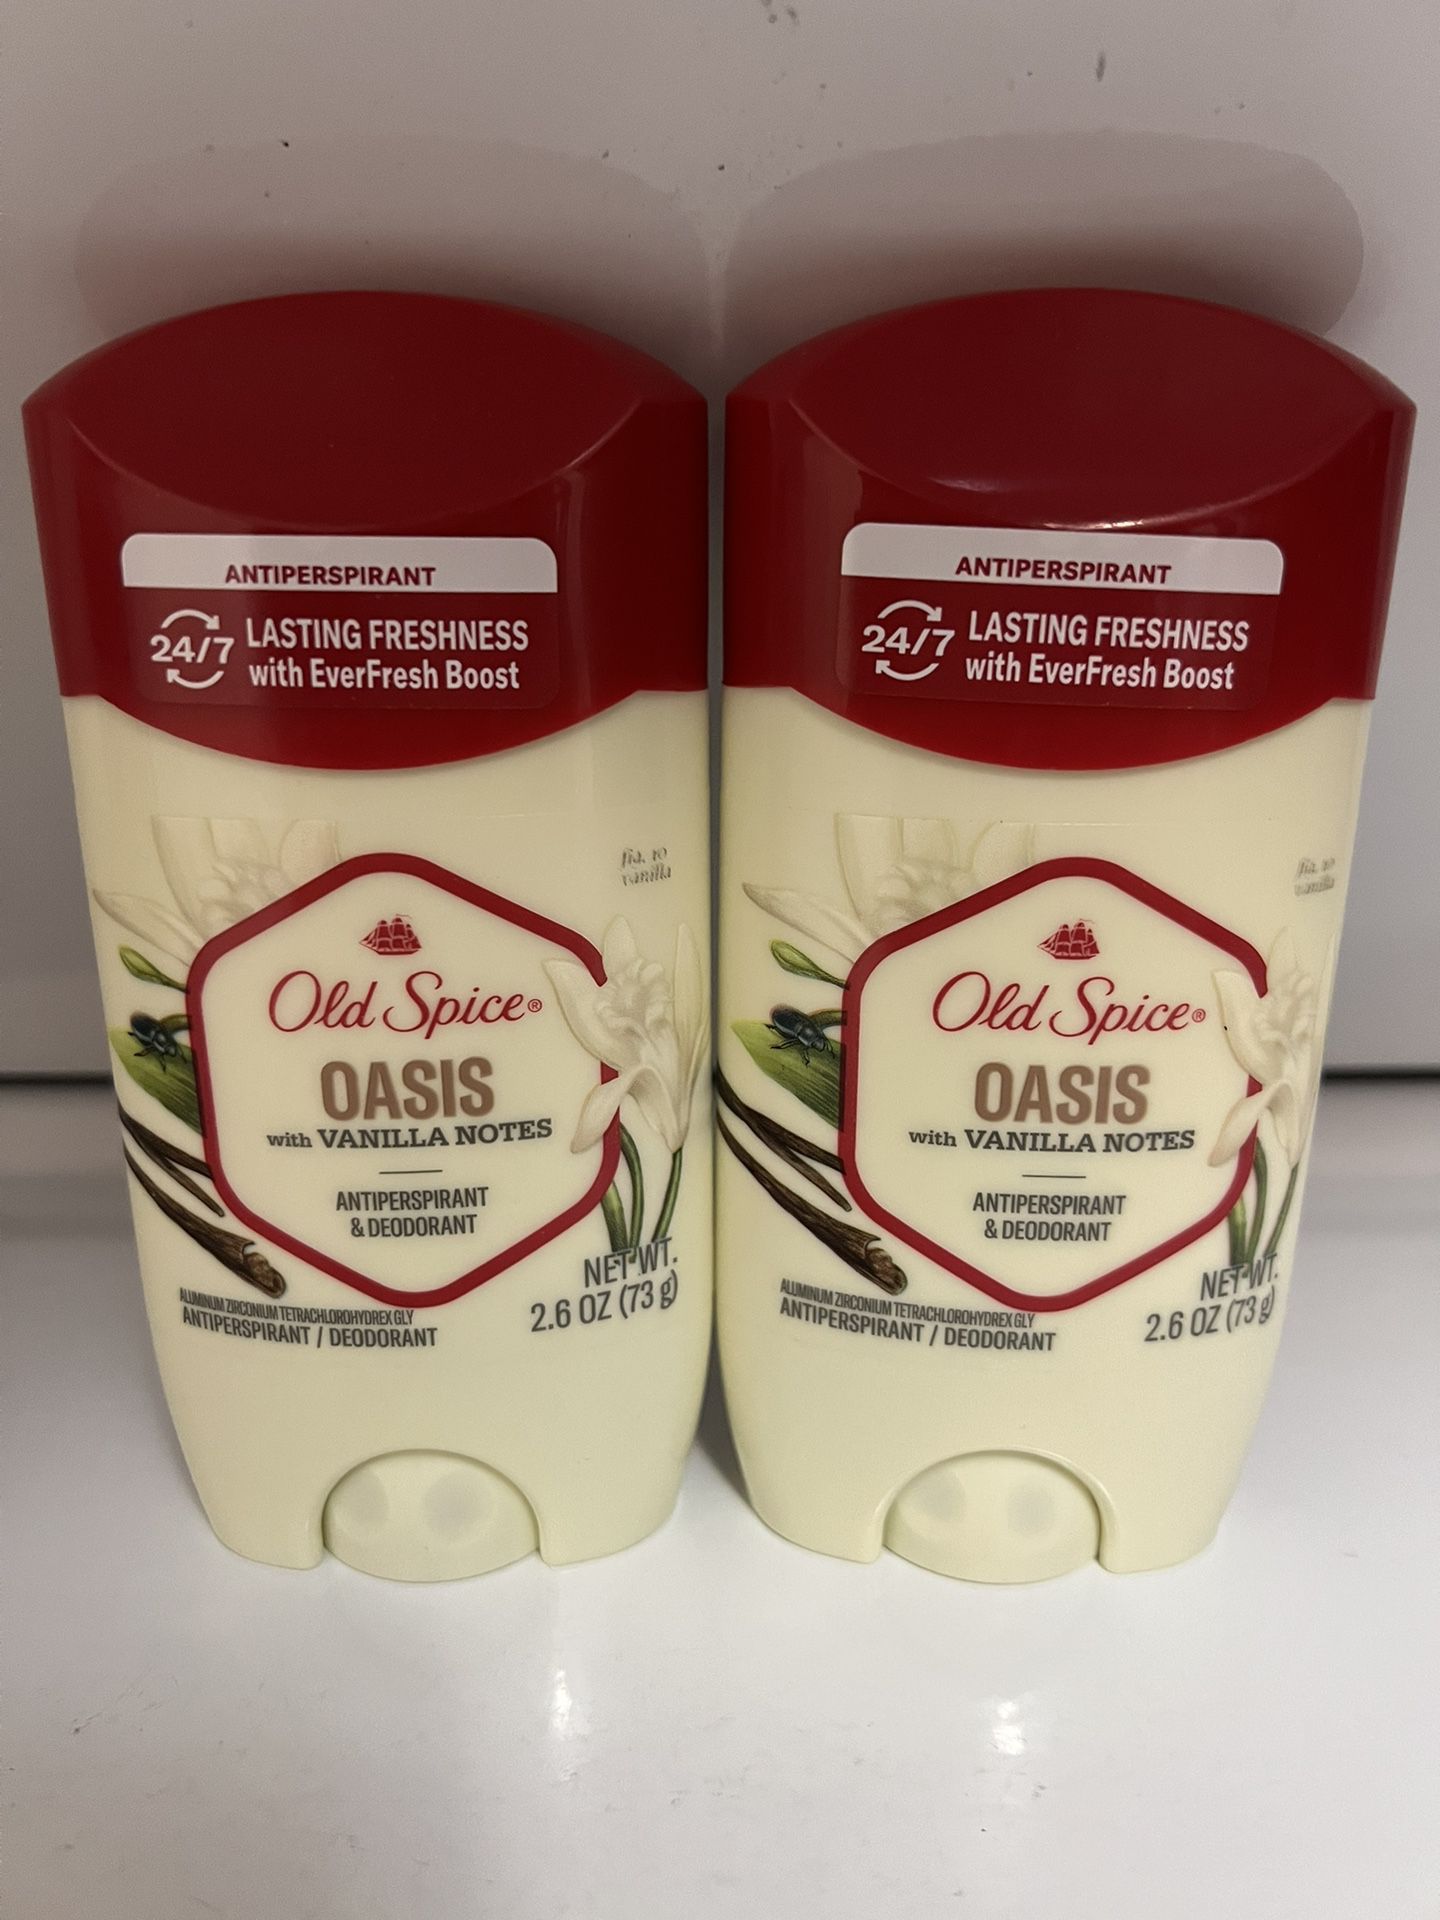 Old Spice deodorant for Men both for $7